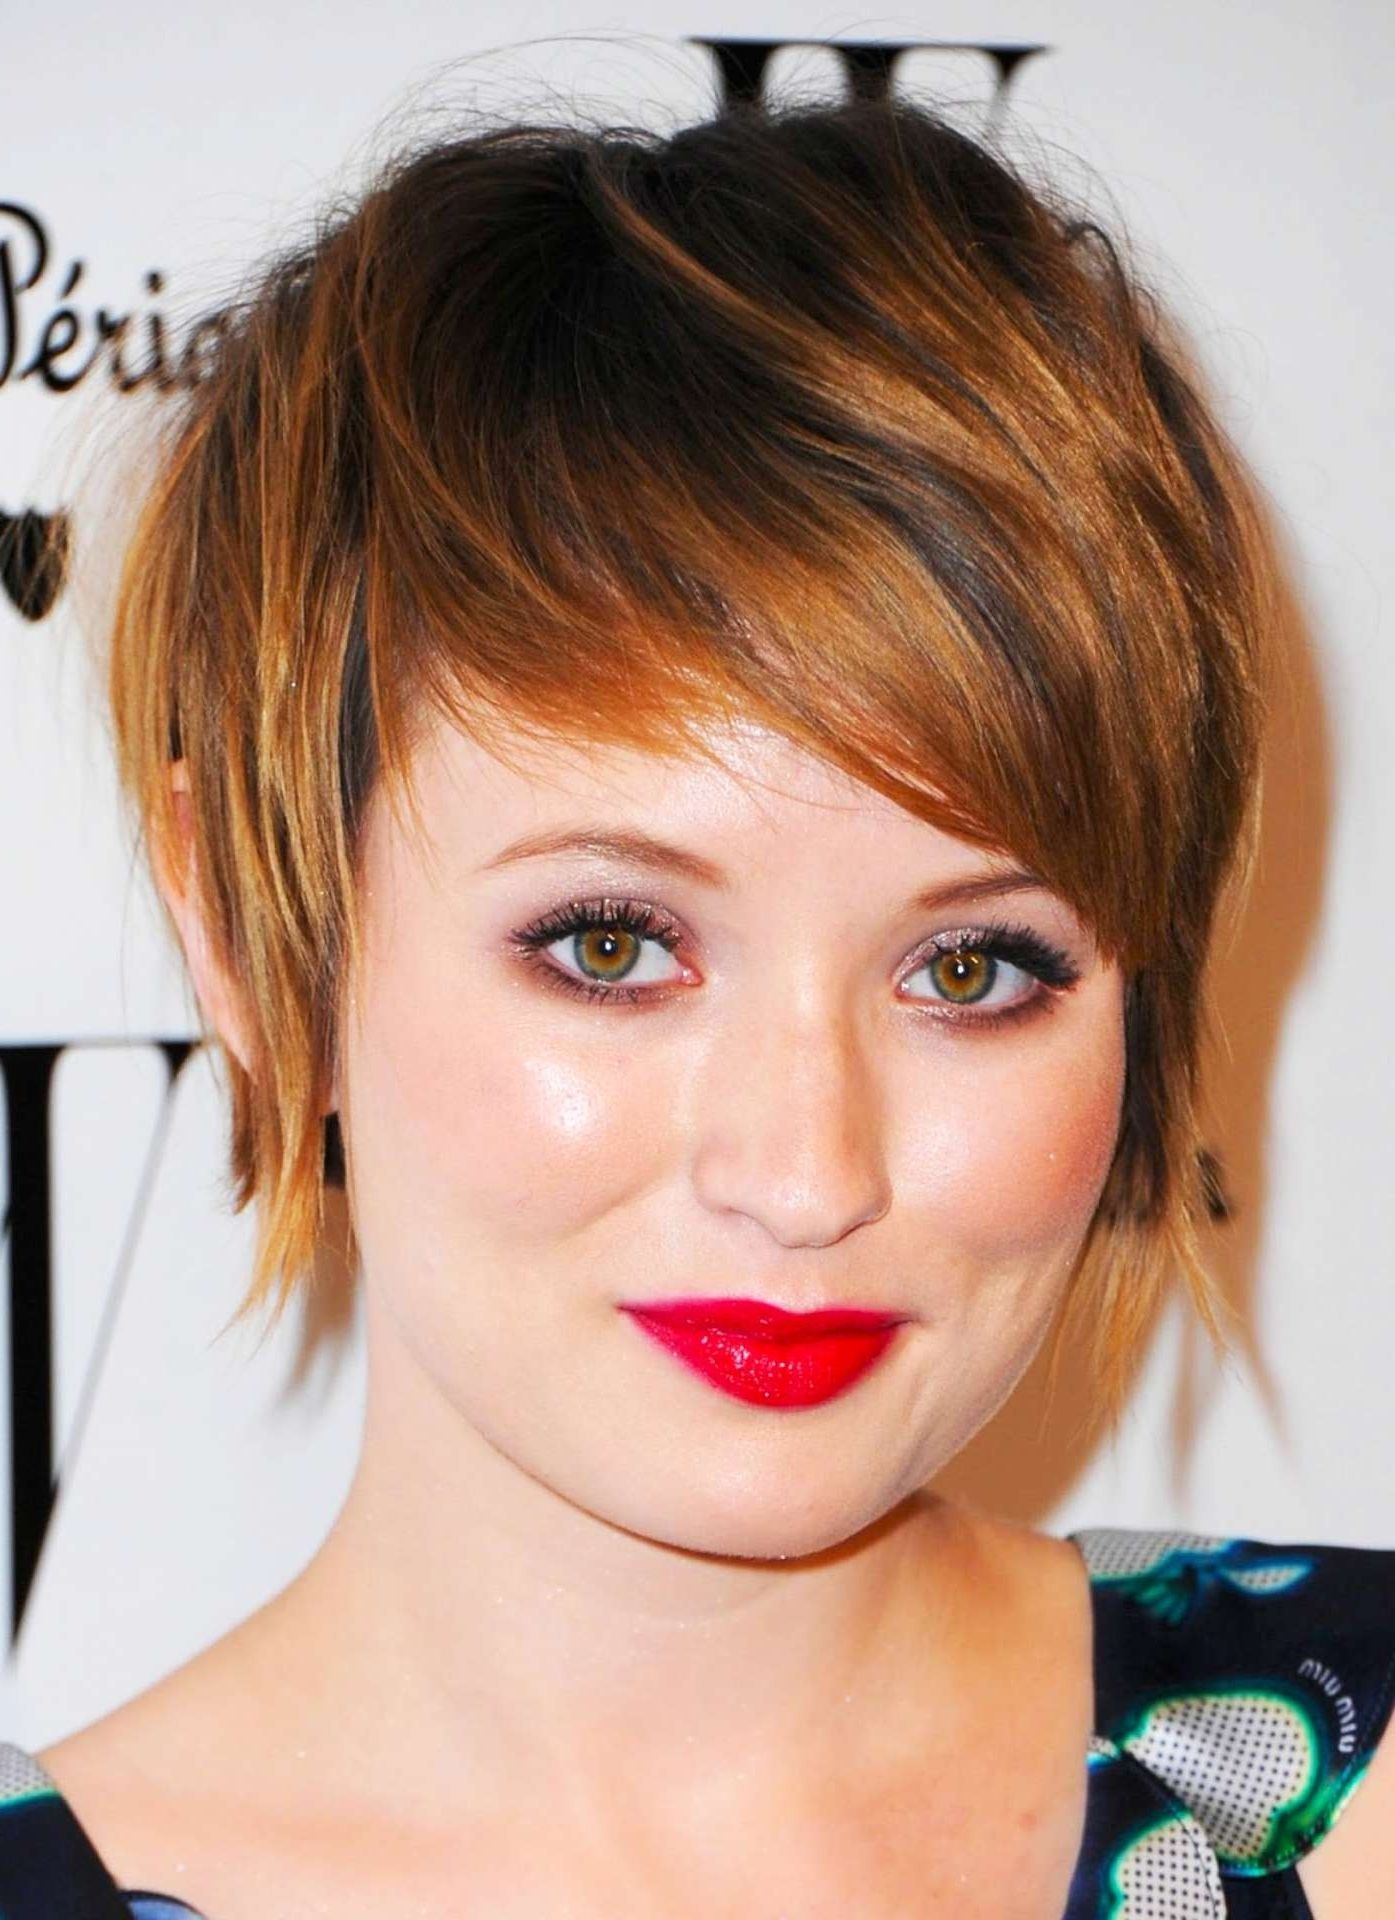 Best Pixie Haircuts For Round Faces 2017 | Hairdrome Pertaining To Most Popular Pixie Hairstyles On Round Faces (View 4 of 15)